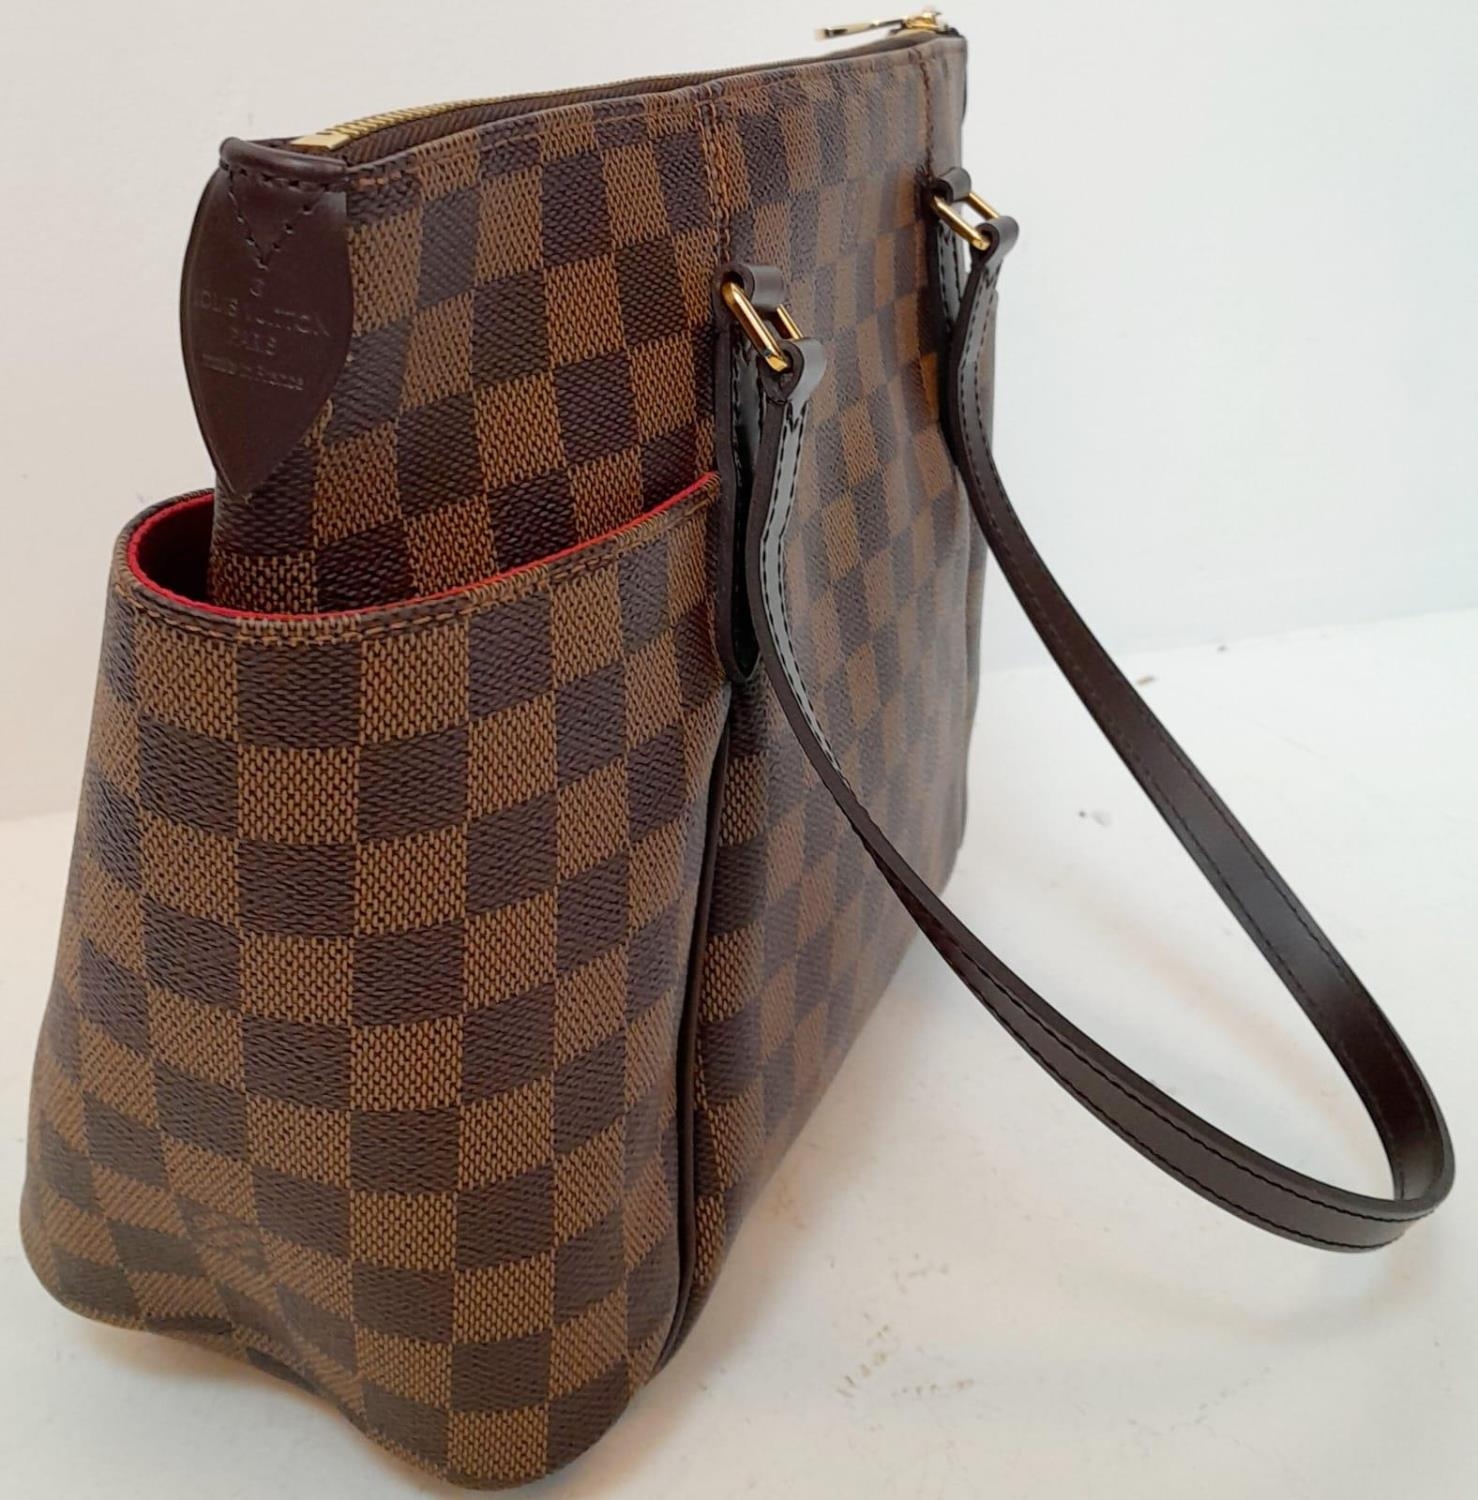 A Louis Vuitton Damier Ebene 'Totally PM' Shoulder Bag. Canvas exterior with gold-toned hardware, - Image 2 of 4